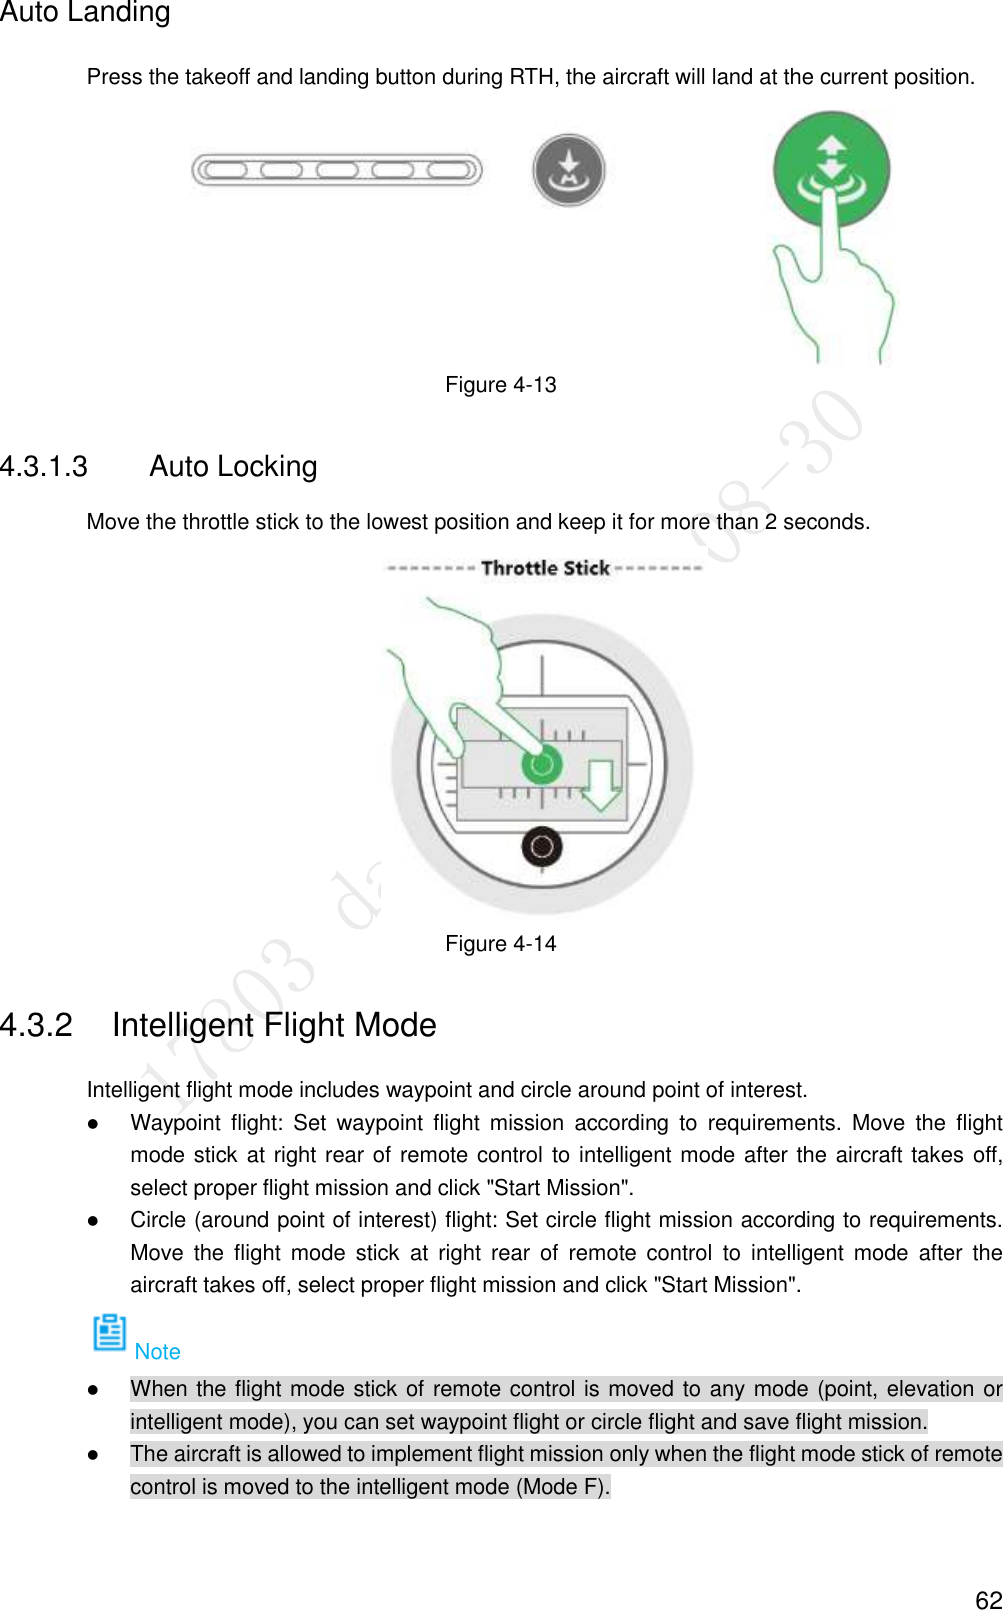  62 Auto Landing Press the takeoff and landing button during RTH, the aircraft will land at the current position.    Figure 4-13 4.3.1.3  Auto Locking Move the throttle stick to the lowest position and keep it for more than 2 seconds.  Figure 4-14 4.3.2  Intelligent Flight Mode Intelligent flight mode includes waypoint and circle around point of interest.  Waypoint  flight:  Set  waypoint  flight  mission  according  to  requirements.  Move  the  flight mode stick at right rear of remote control to intelligent mode after the aircraft takes off, select proper flight mission and click &quot;Start Mission&quot;.  Circle (around point of interest) flight: Set circle flight mission according to requirements. Move  the  flight  mode  stick  at  right  rear  of  remote  control  to  intelligent  mode  after  the aircraft takes off, select proper flight mission and click &quot;Start Mission&quot;. Note  When the flight mode stick of remote control is moved to any mode (point, elevation or intelligent mode), you can set waypoint flight or circle flight and save flight mission.  The aircraft is allowed to implement flight mission only when the flight mode stick of remote control is moved to the intelligent mode (Mode F). 